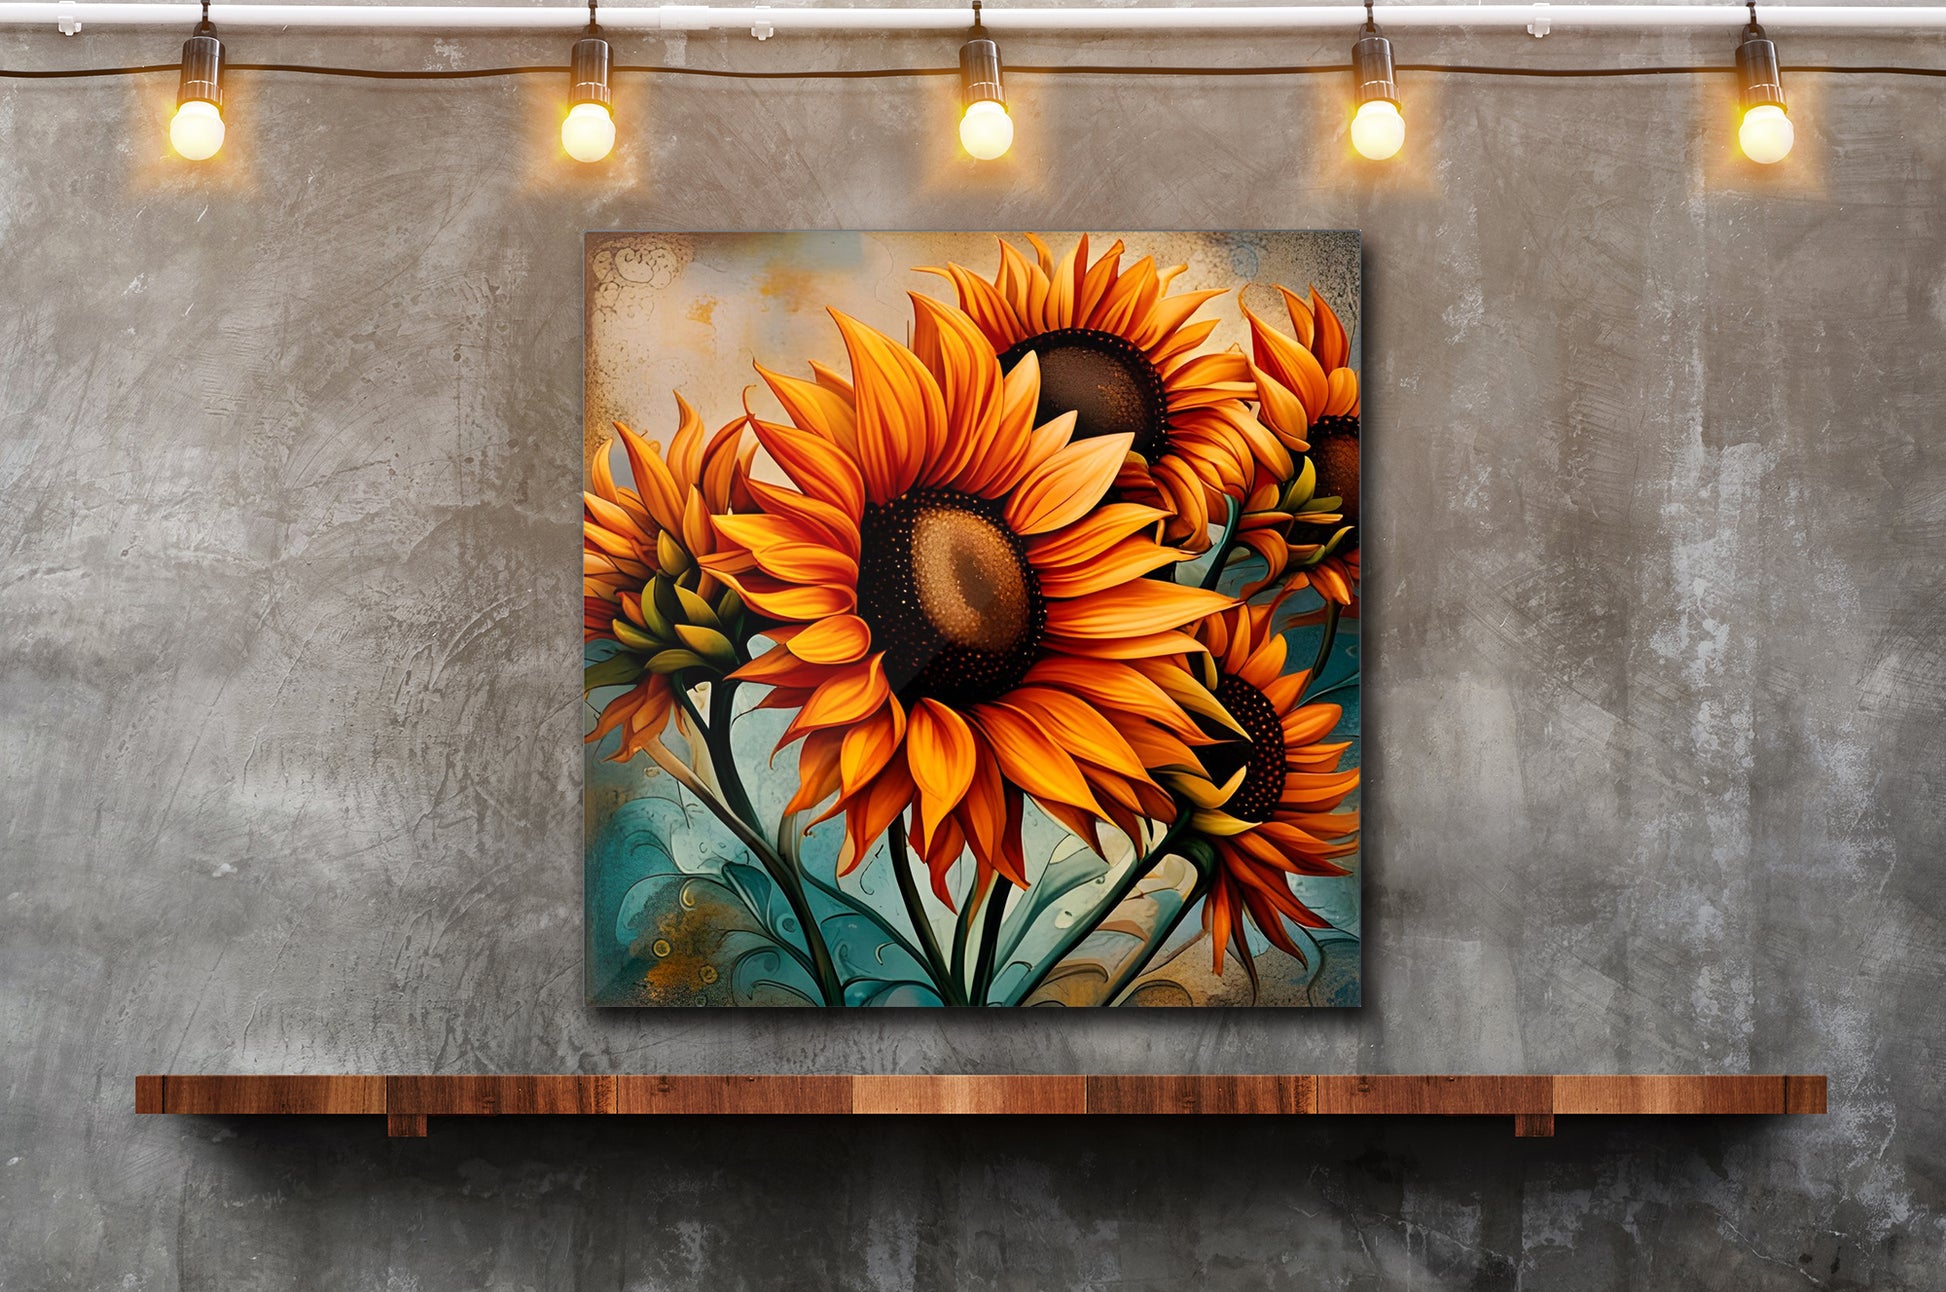 Sunflower Lovers Delight - Sunflower Crop on Distressed Blue and Copper Background Printed on Recycled Aluminum hung on wall